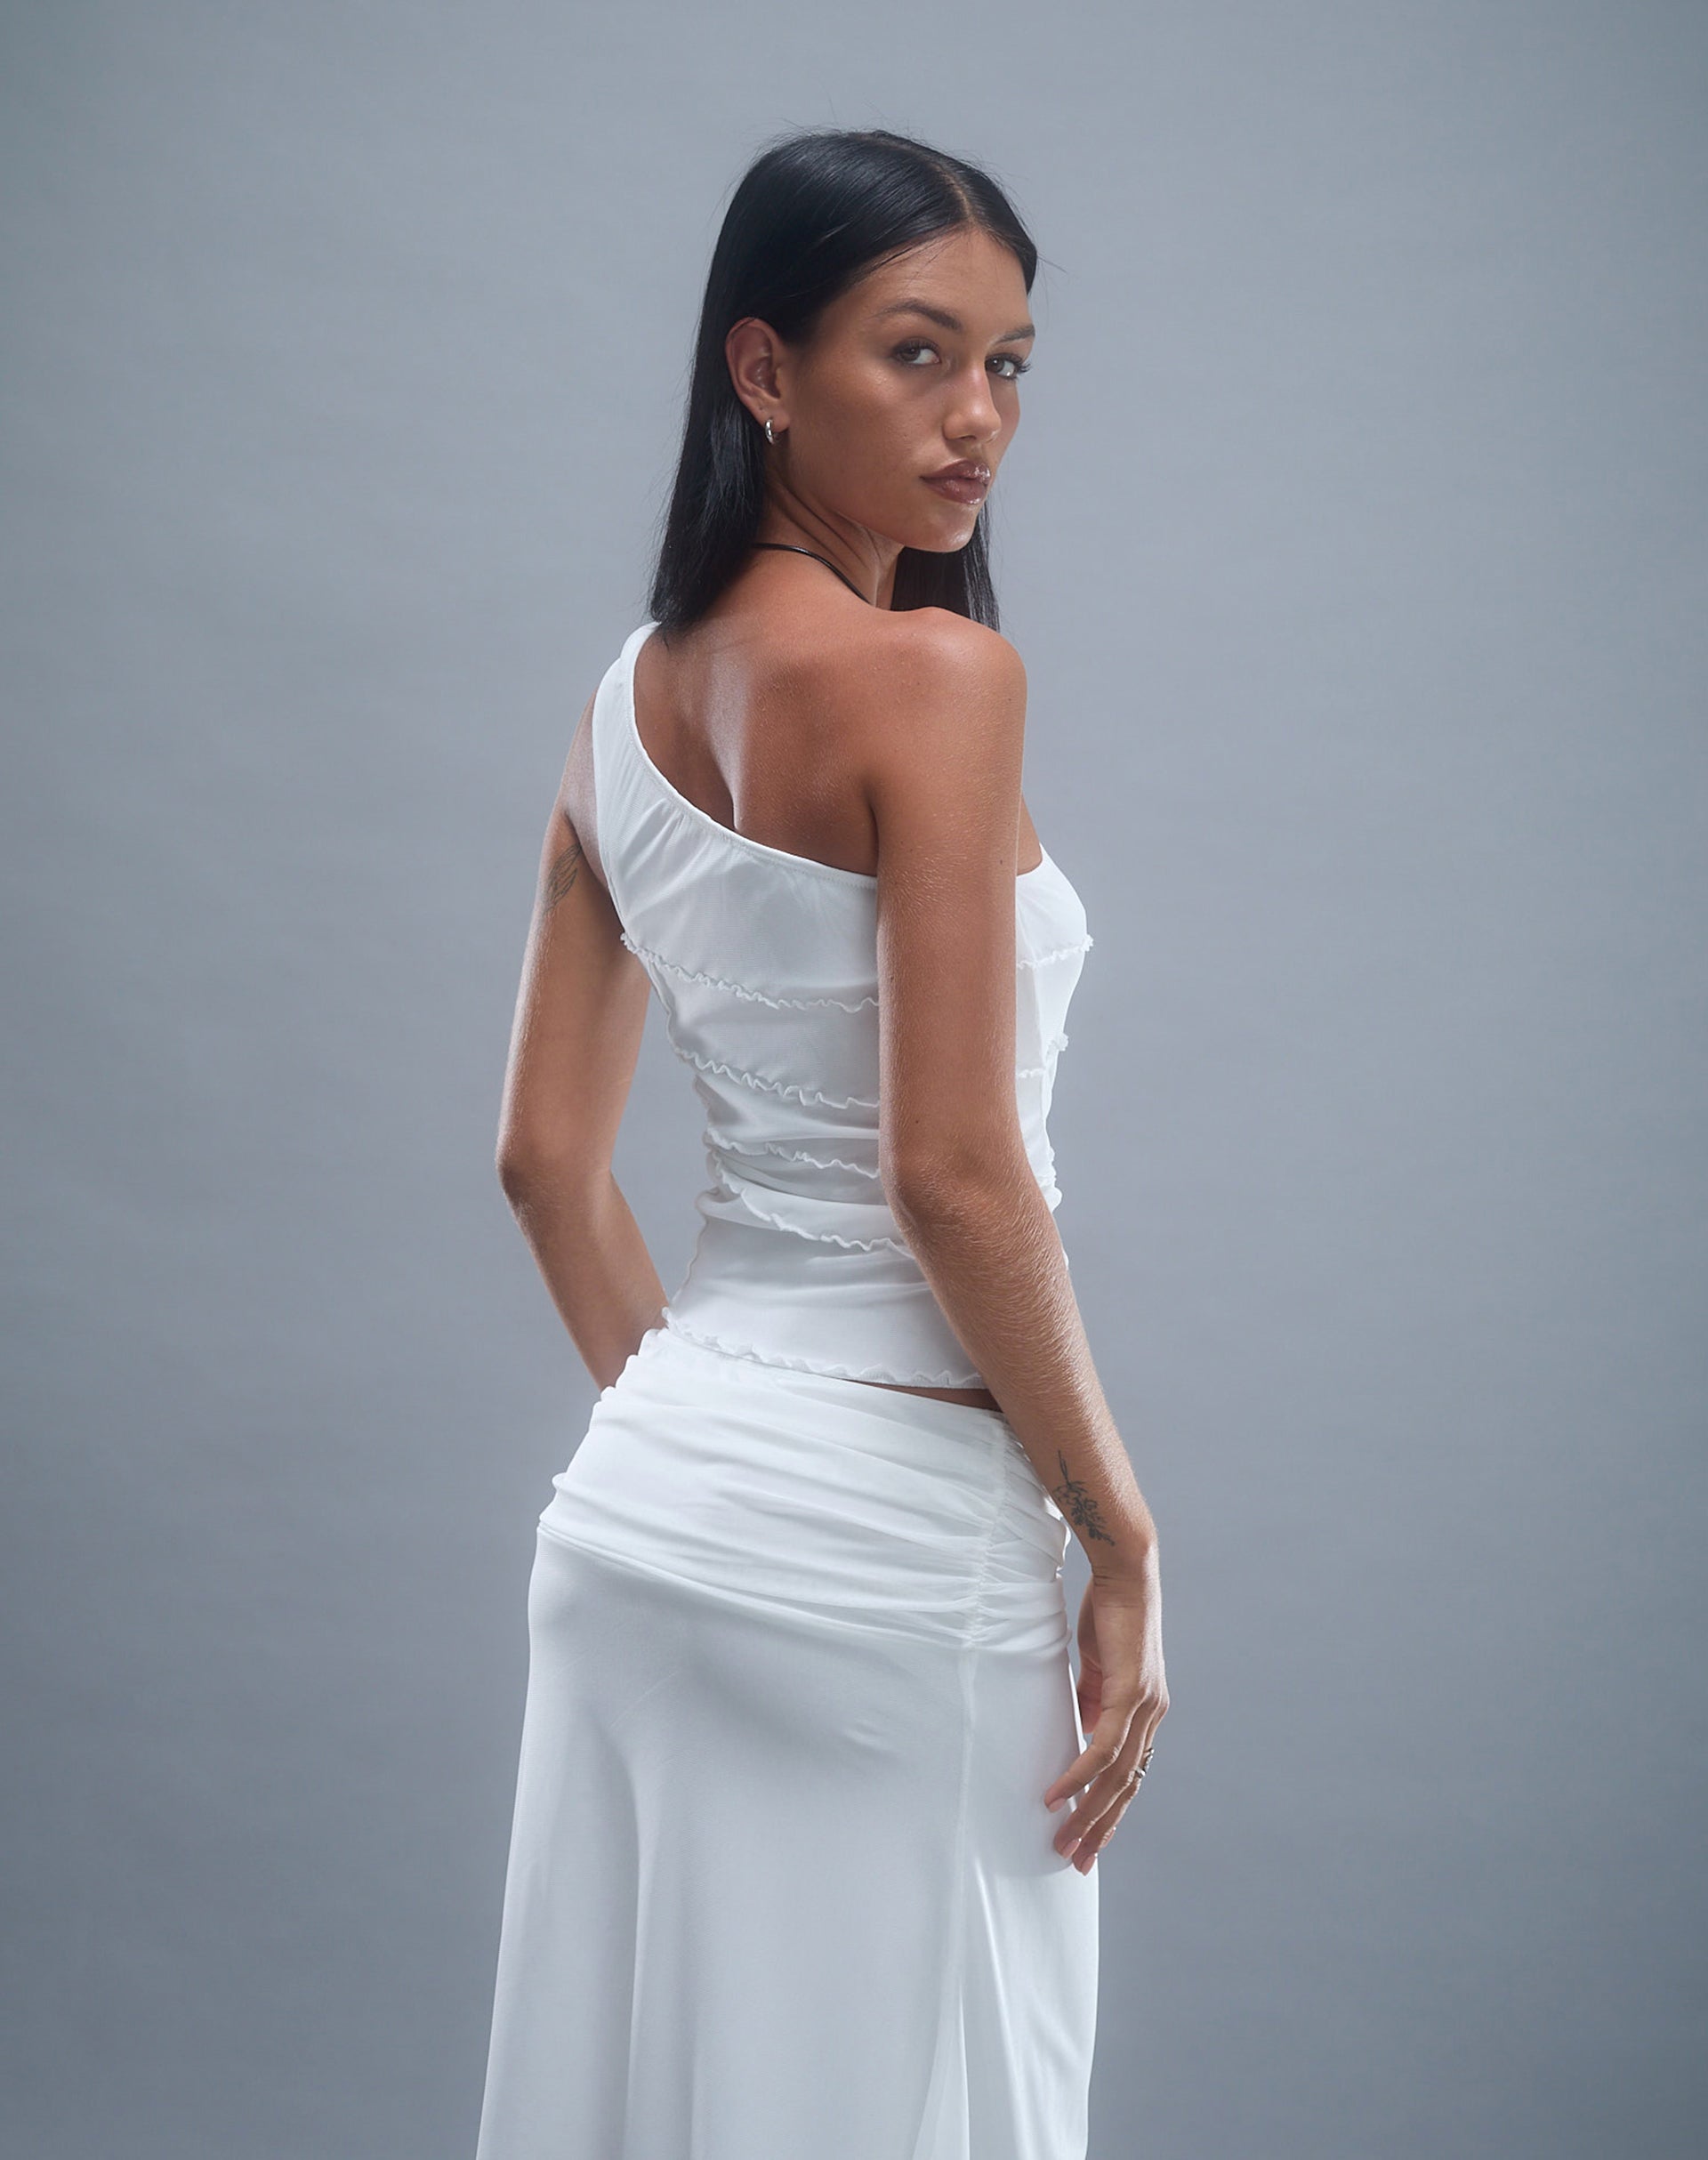 Image of Cochise Seam Detail One Shoulder Mesh Top in Ivory